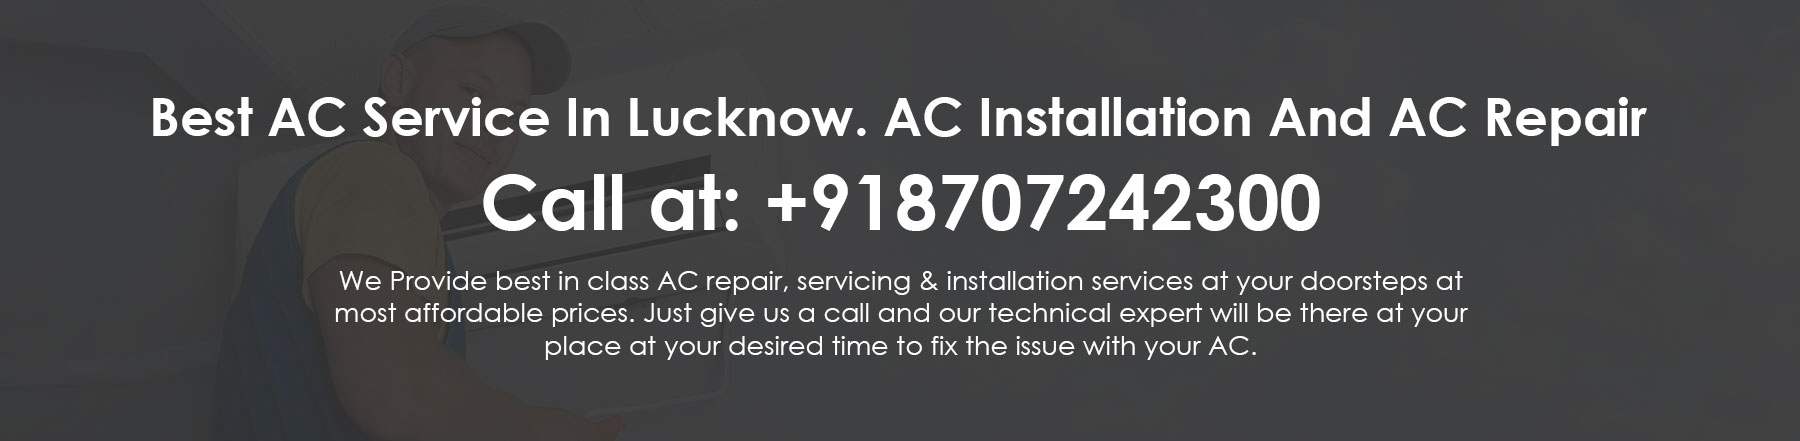 AC Service in Lucknow